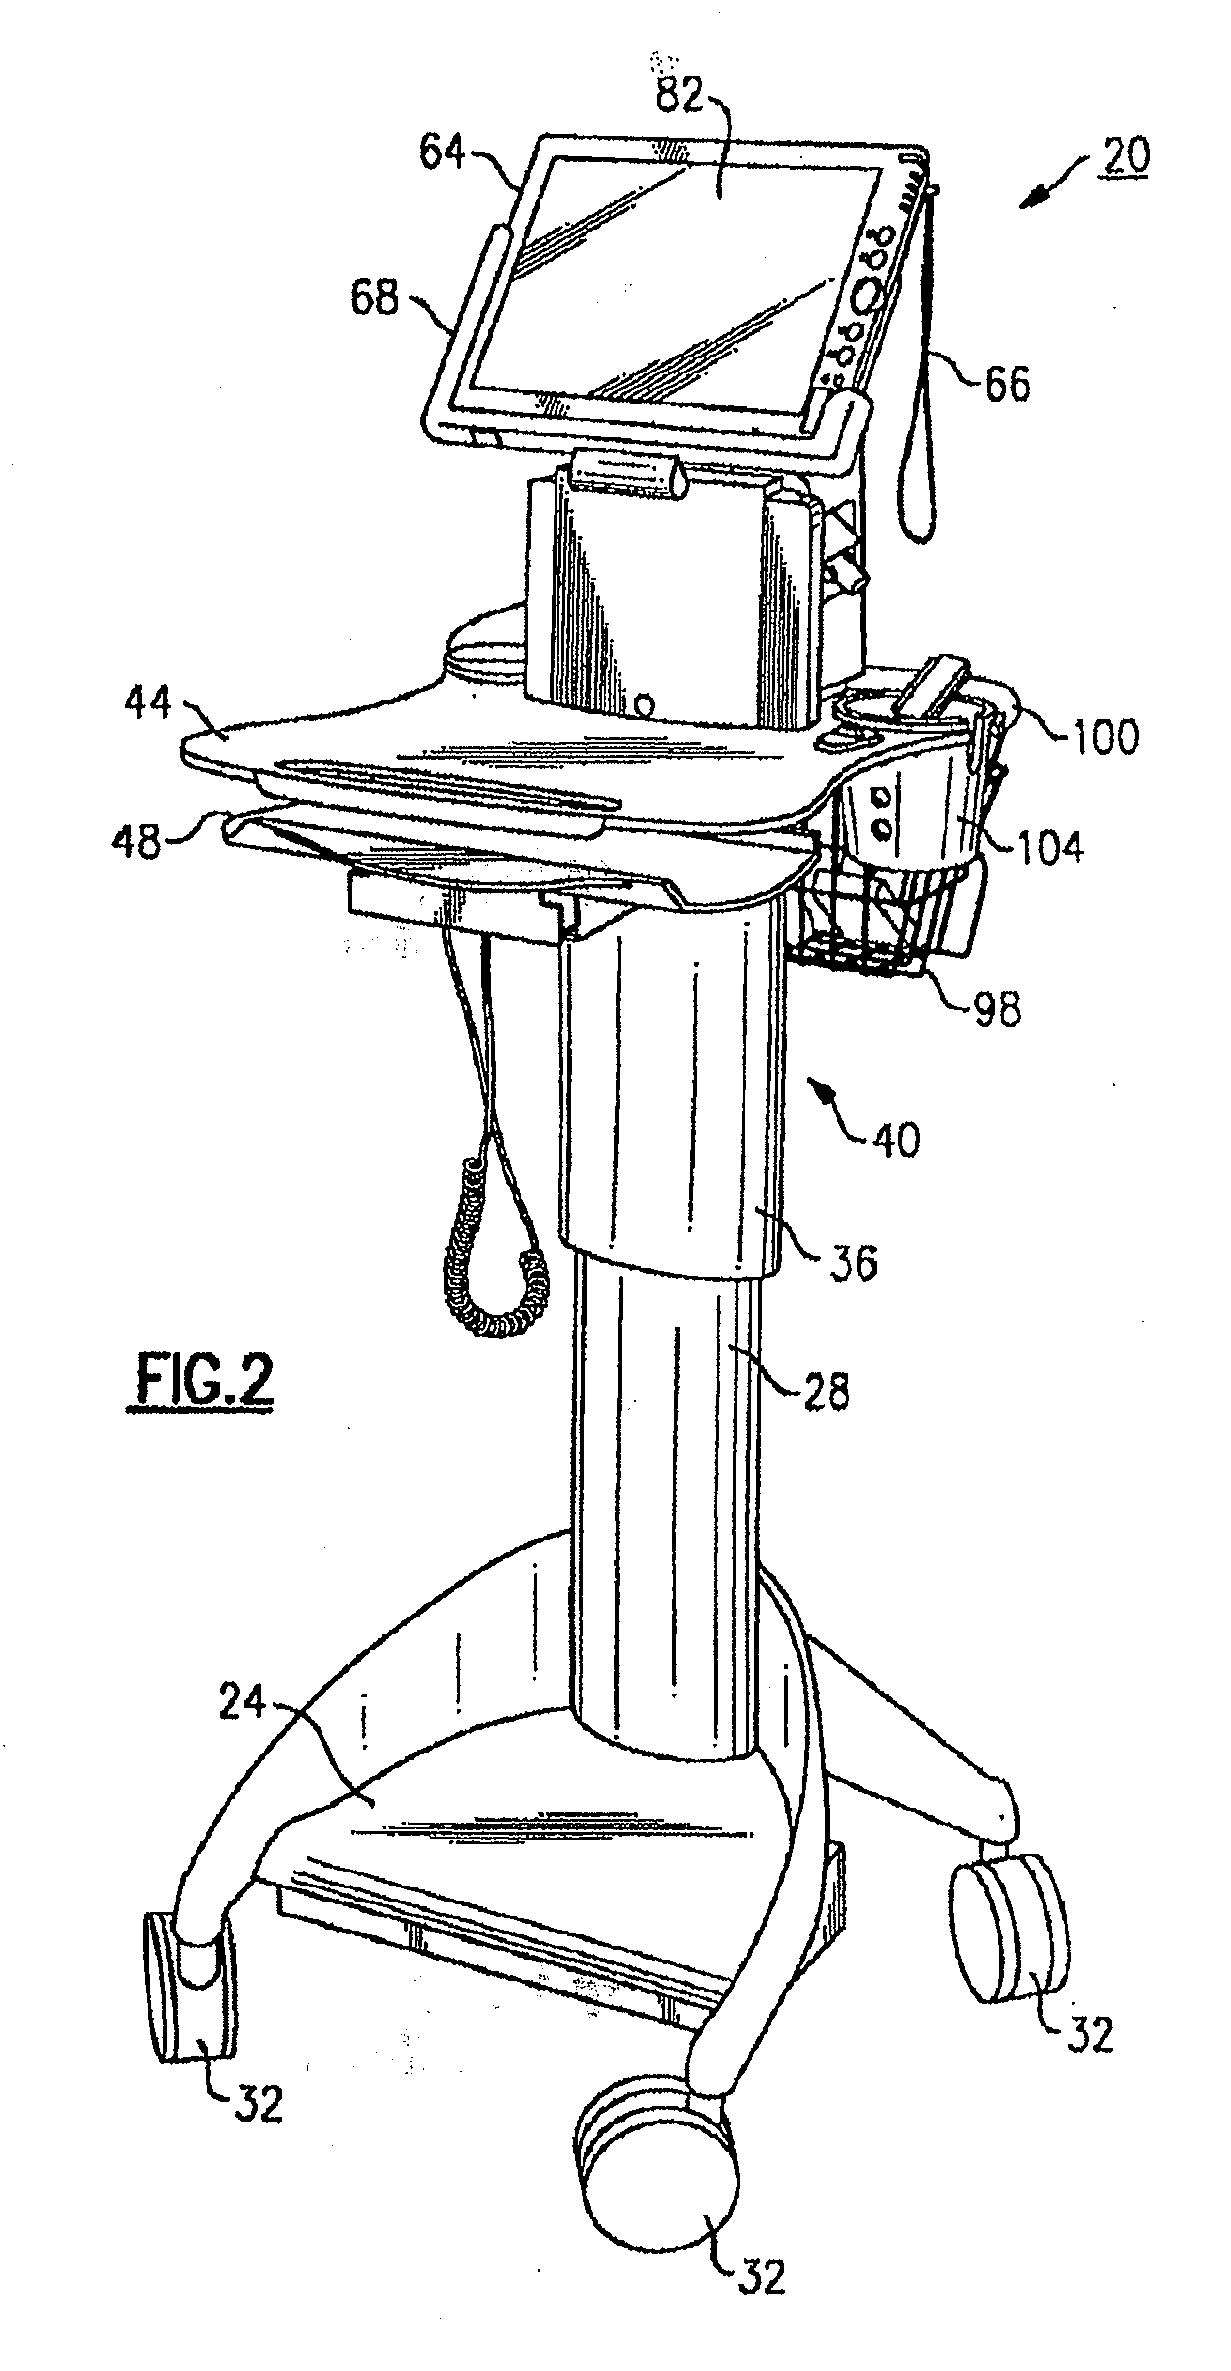 Mobile medical workstation and a temporarily associating mobile computing device